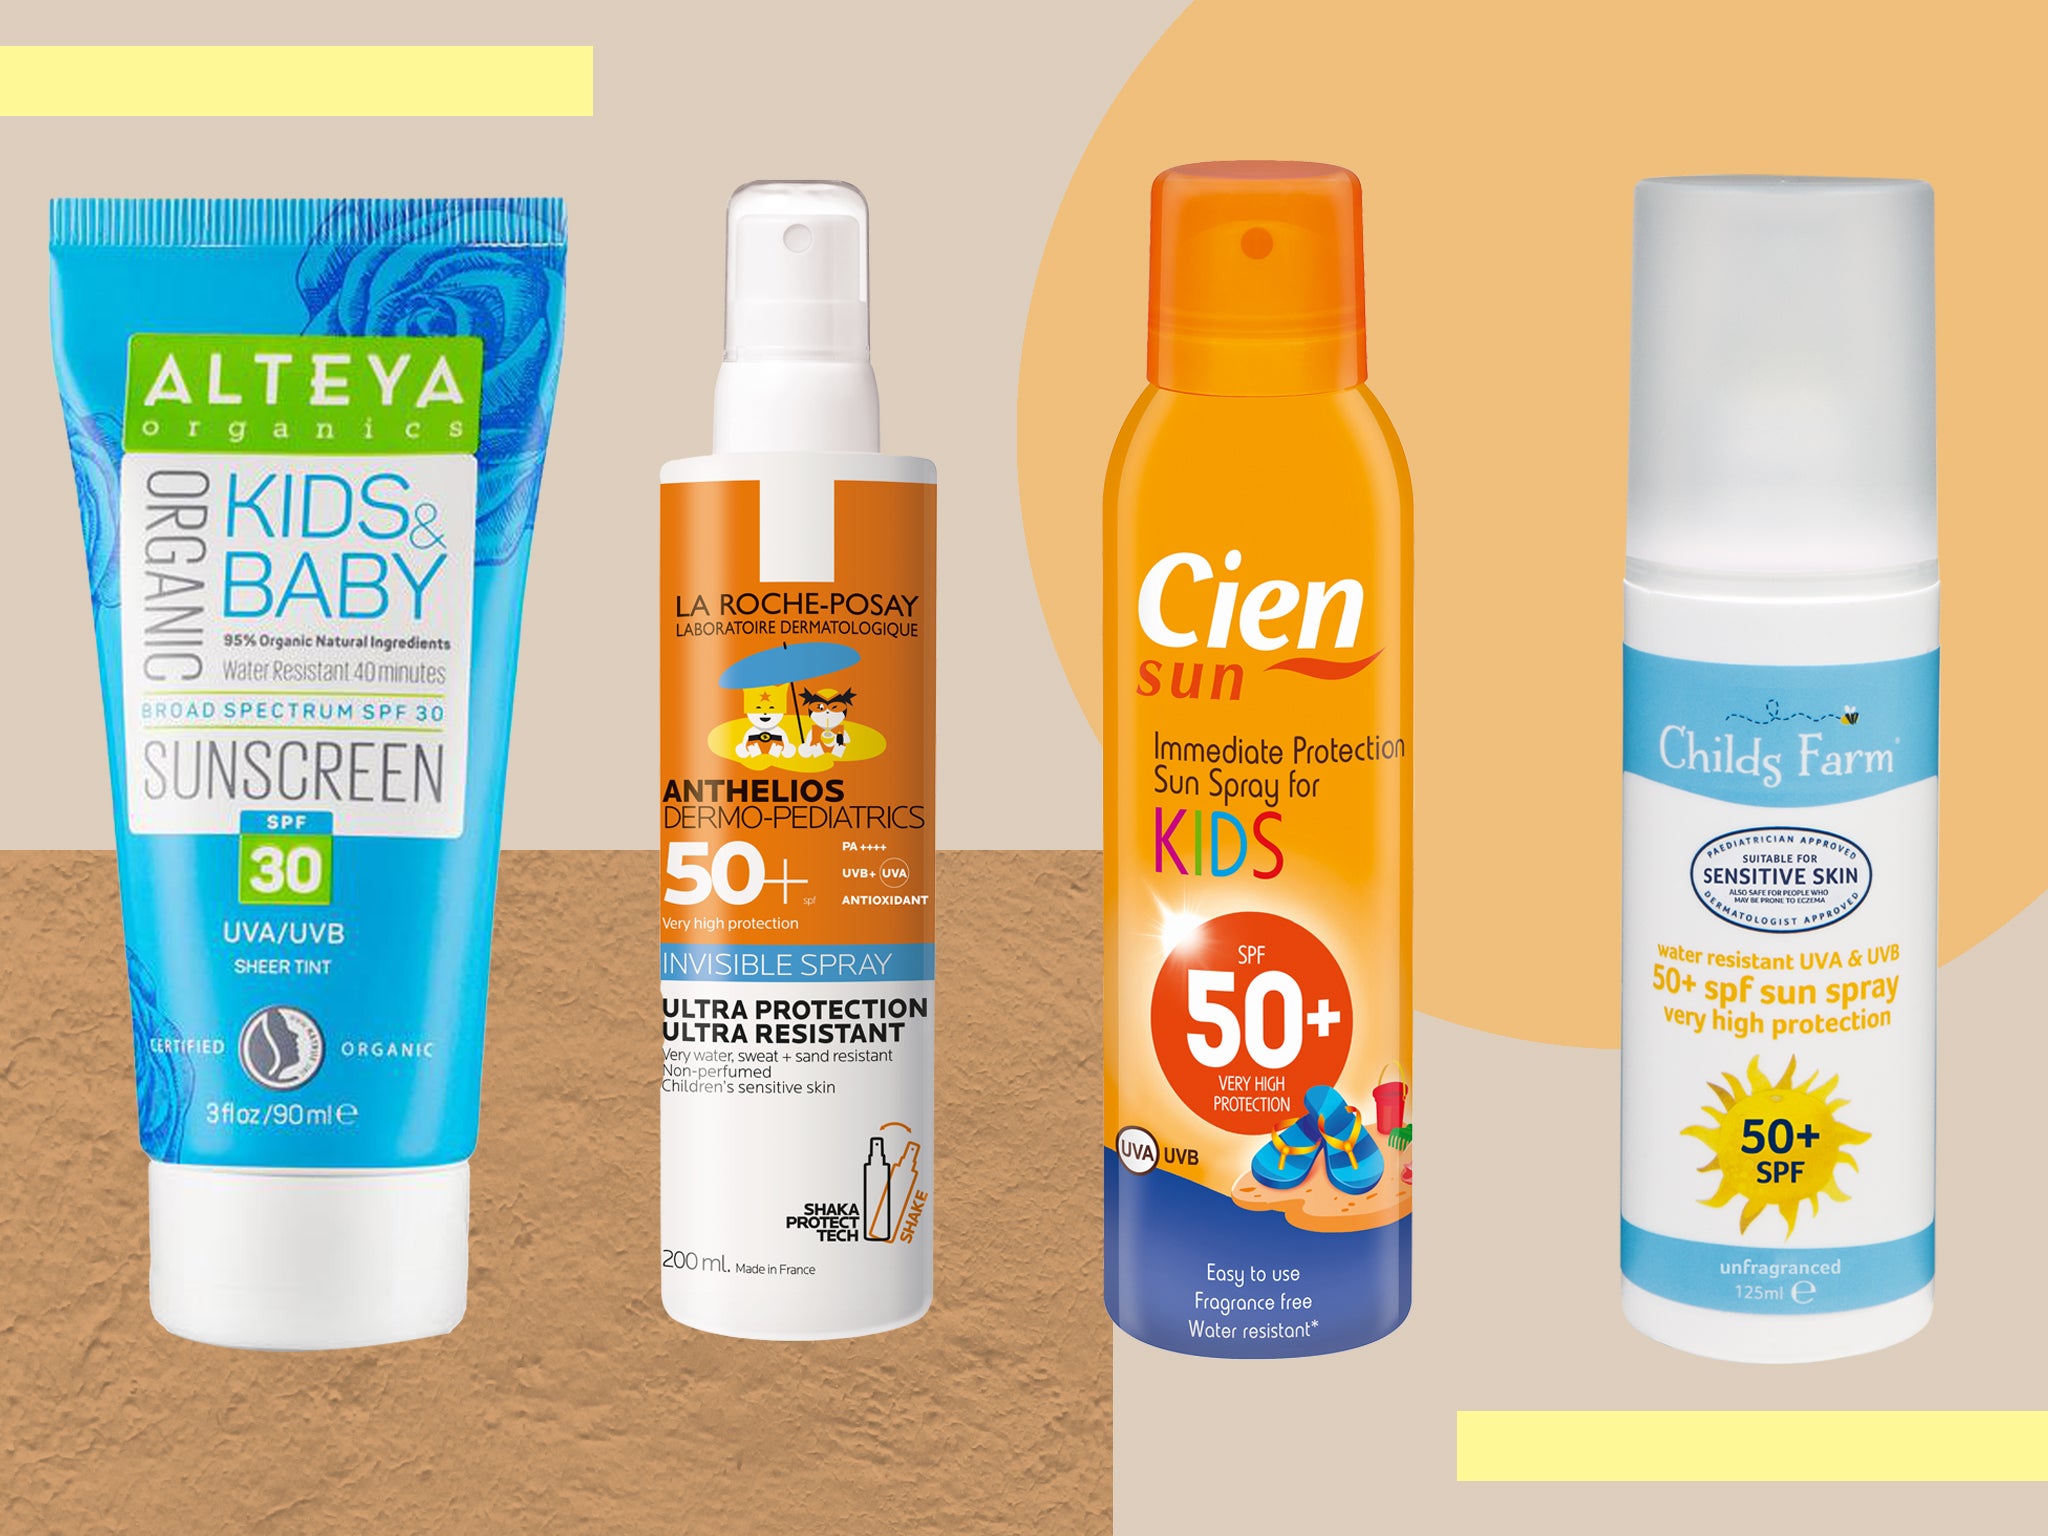 10 best sunscreen for kids to protect their sensitive skin